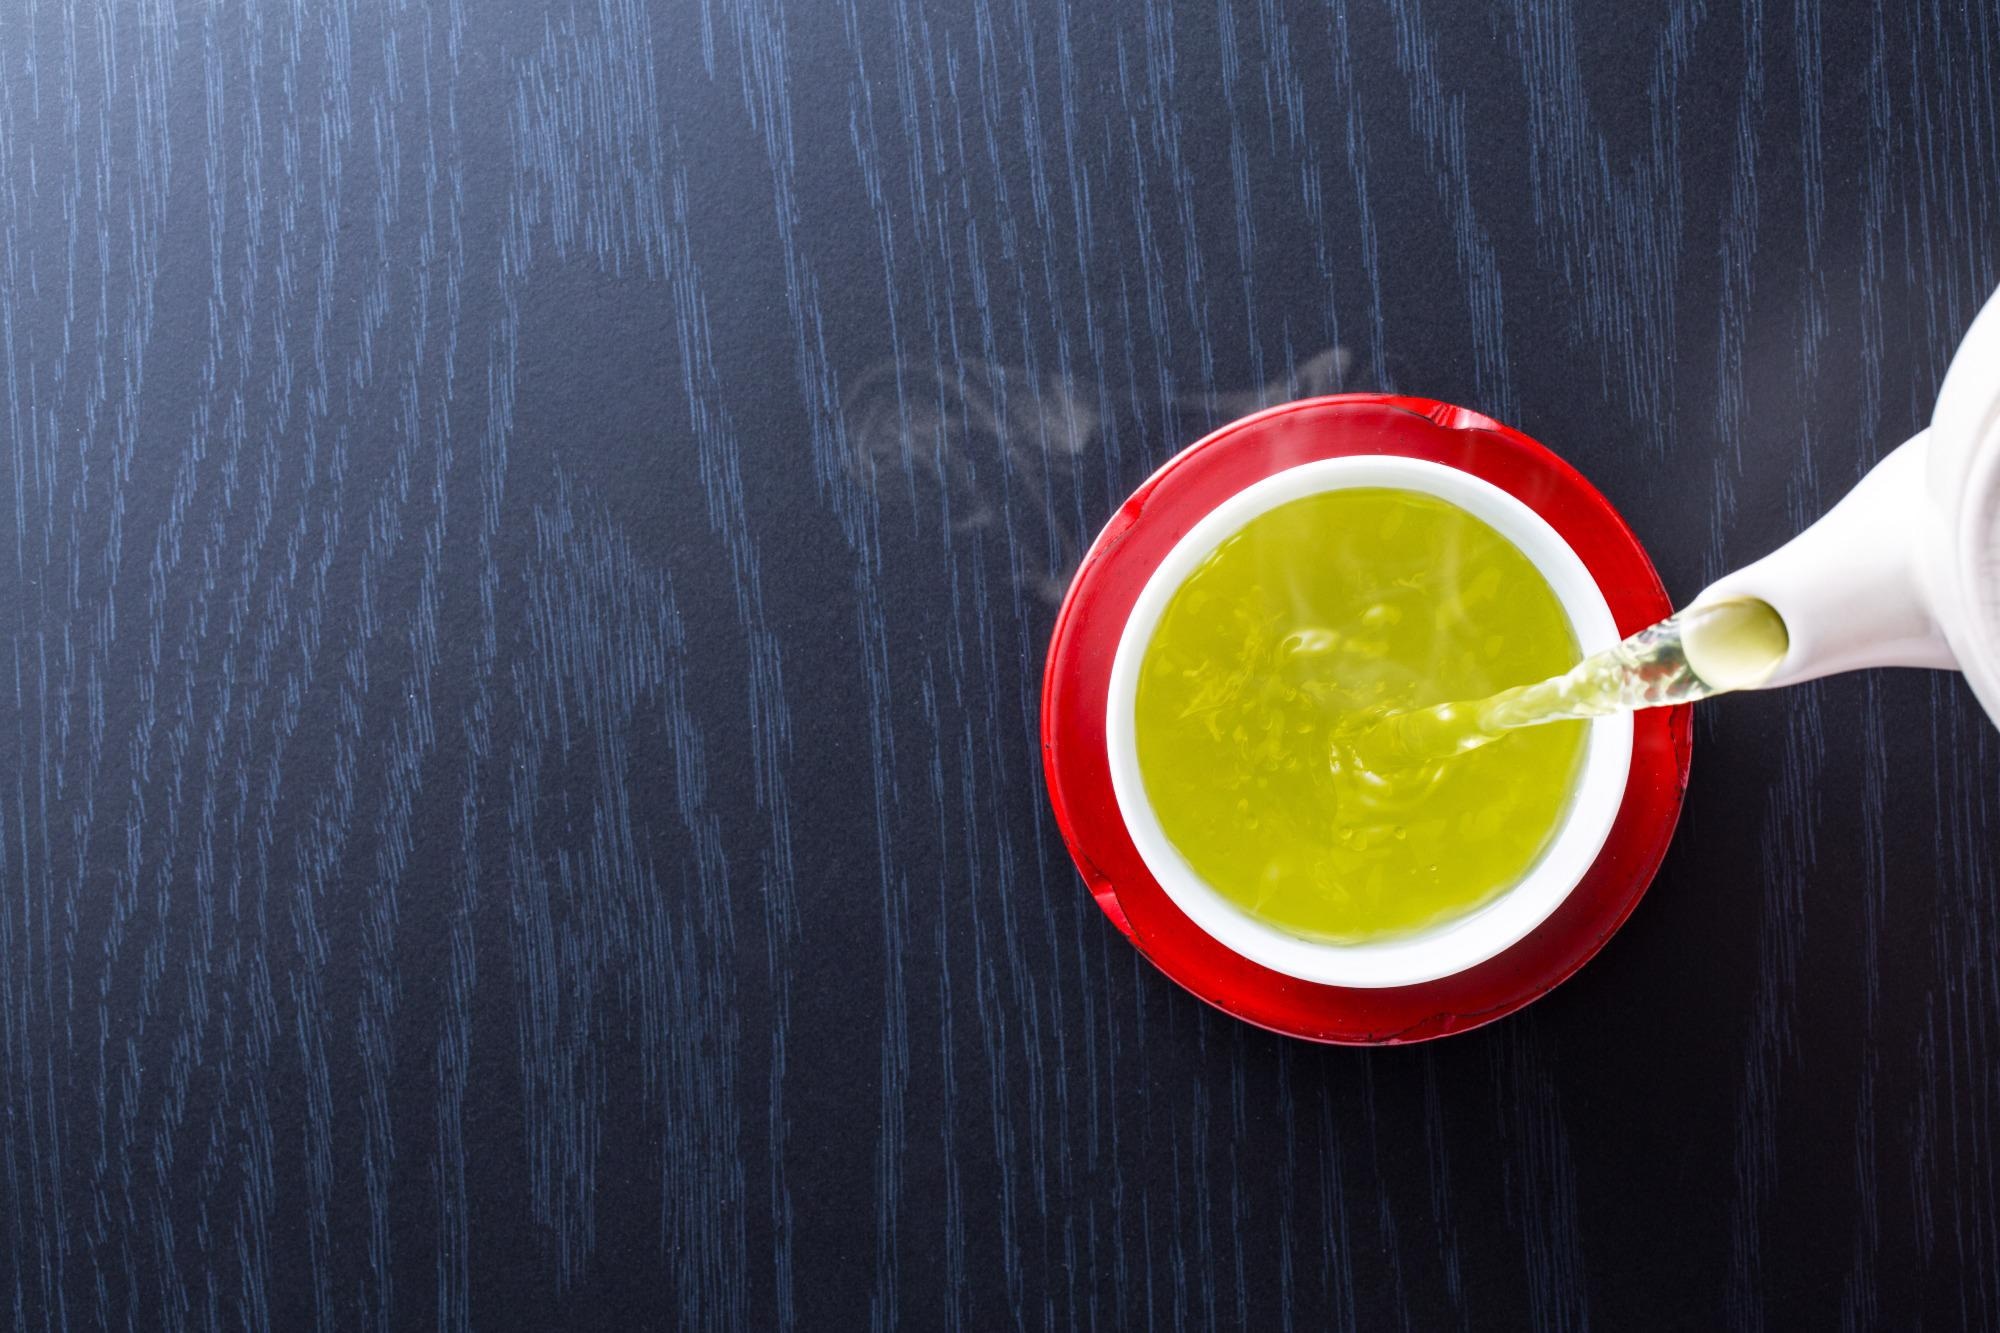 Study: The green tea catechin EGCG provides proof-of-concept for a pan-coronavirus attachment inhibitor. Image Credit: jazz3311 / Shutterstock